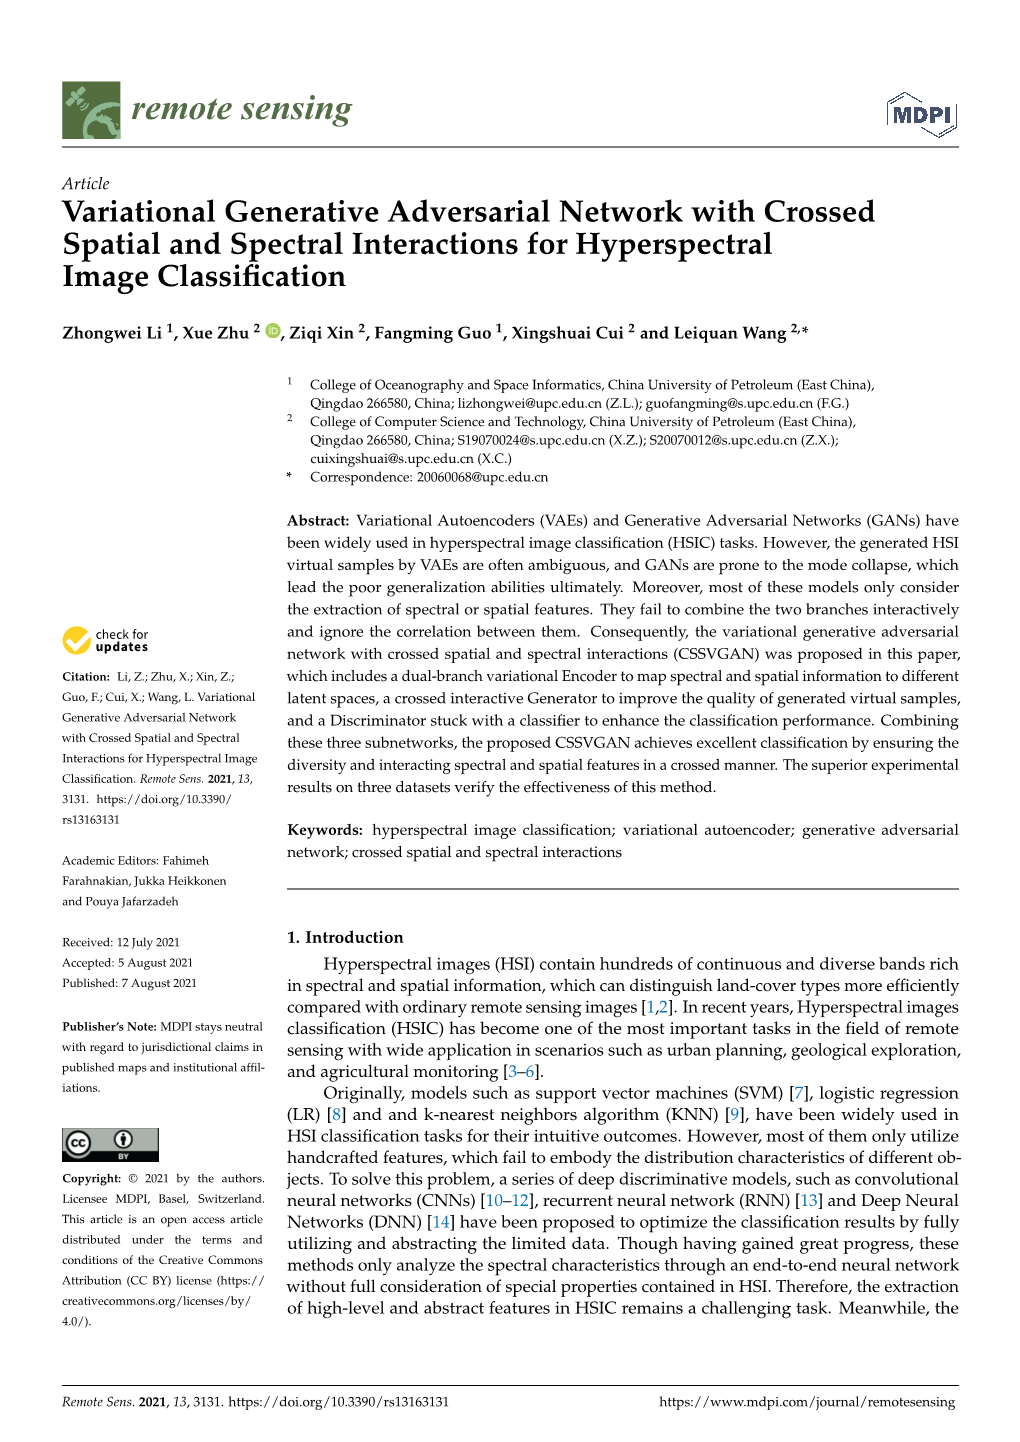 Variational Generative Adversarial Network with Crossed Spatial and Spectral Interactions for Hyperspectral Image Classiﬁcation